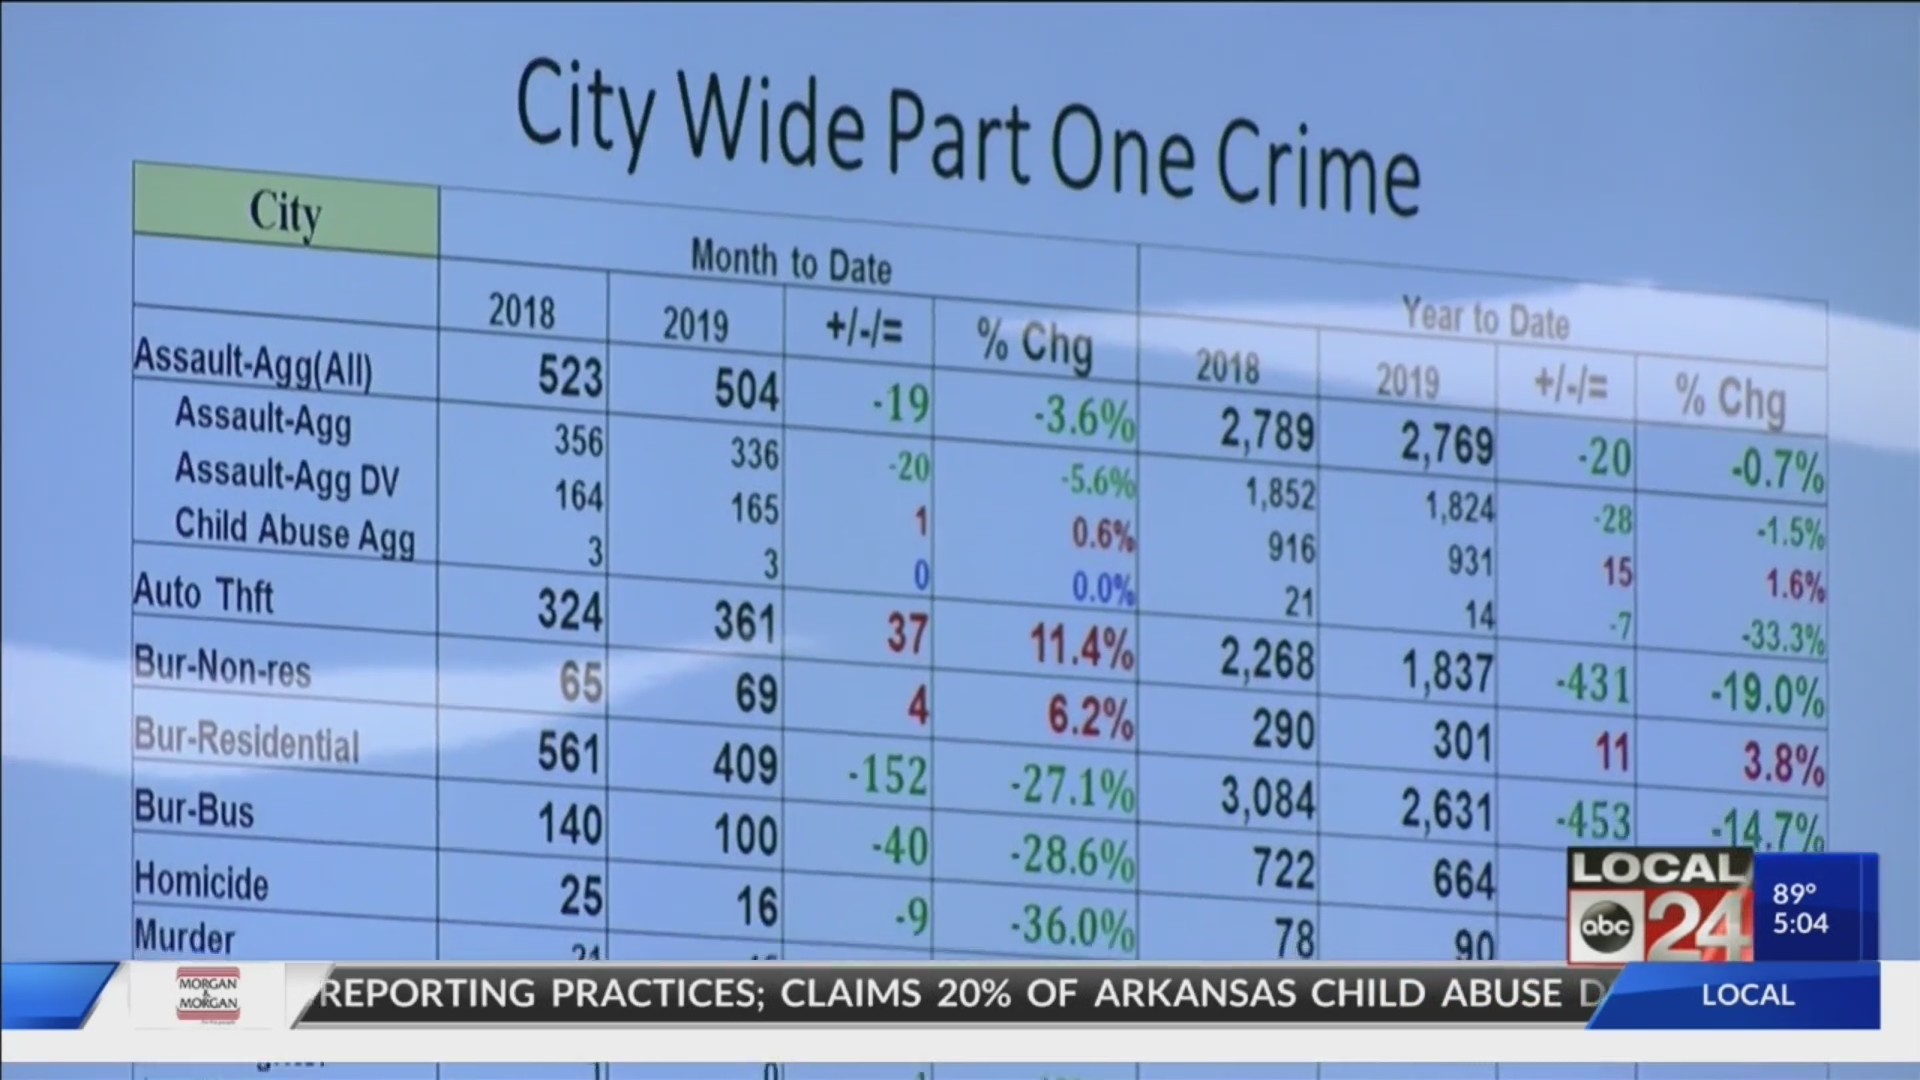 Memphis Crime rate is down, but murder rate up